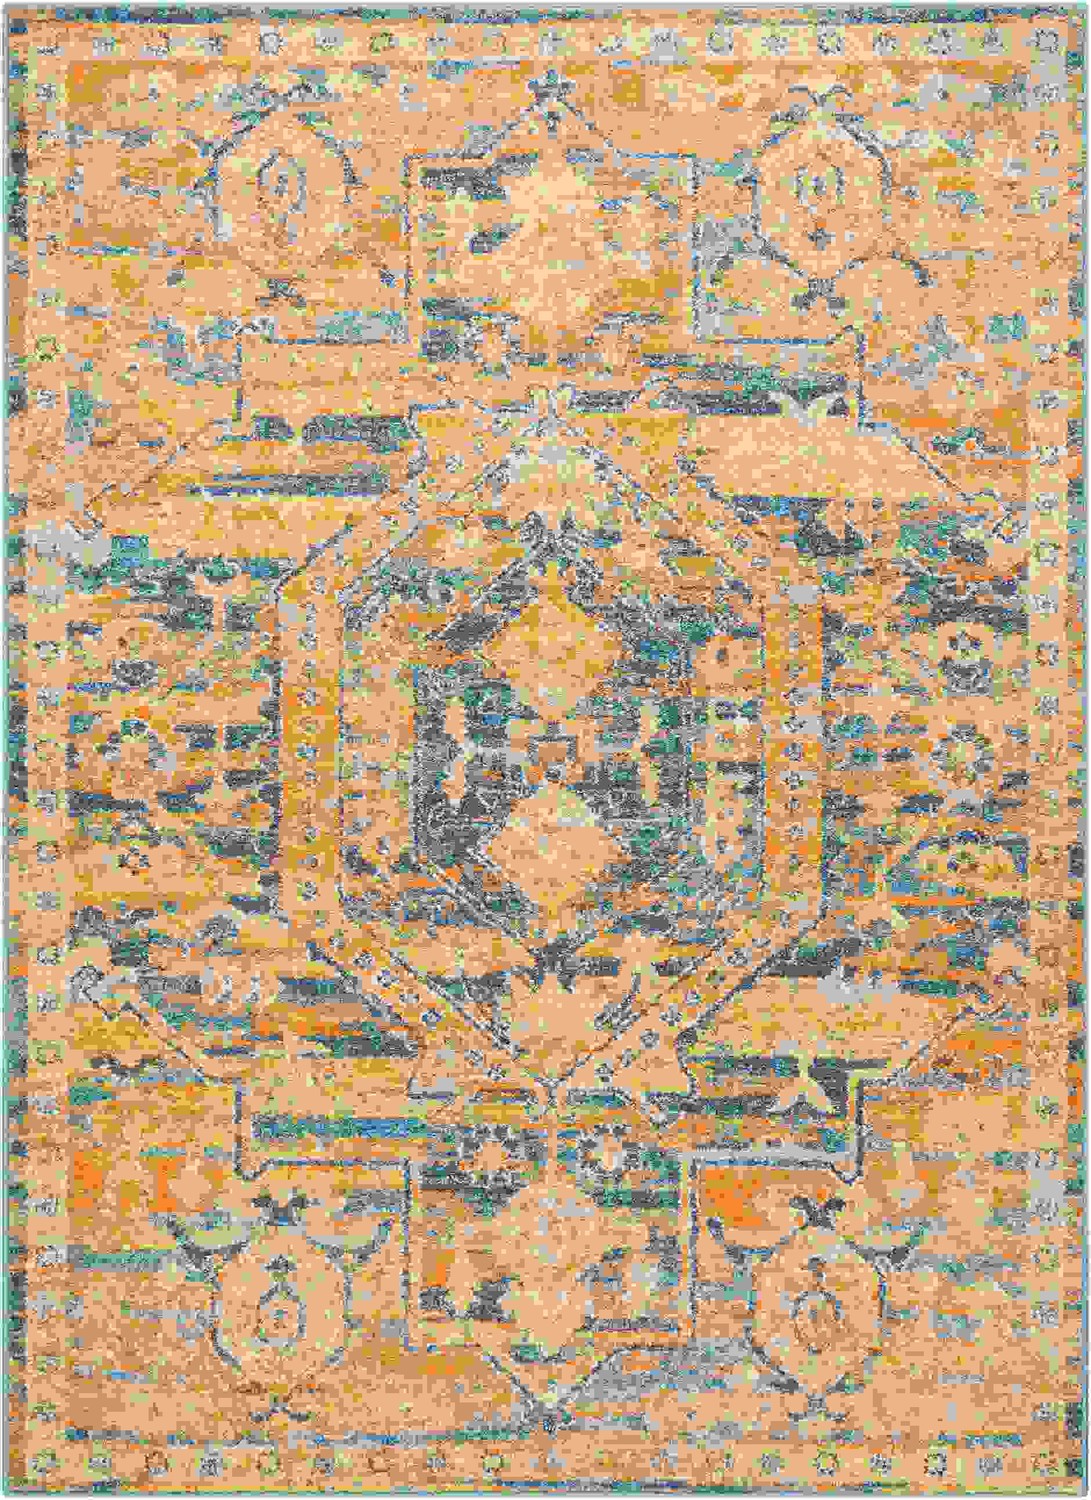 4 x 6 Gold and Blue Antique Area Rug